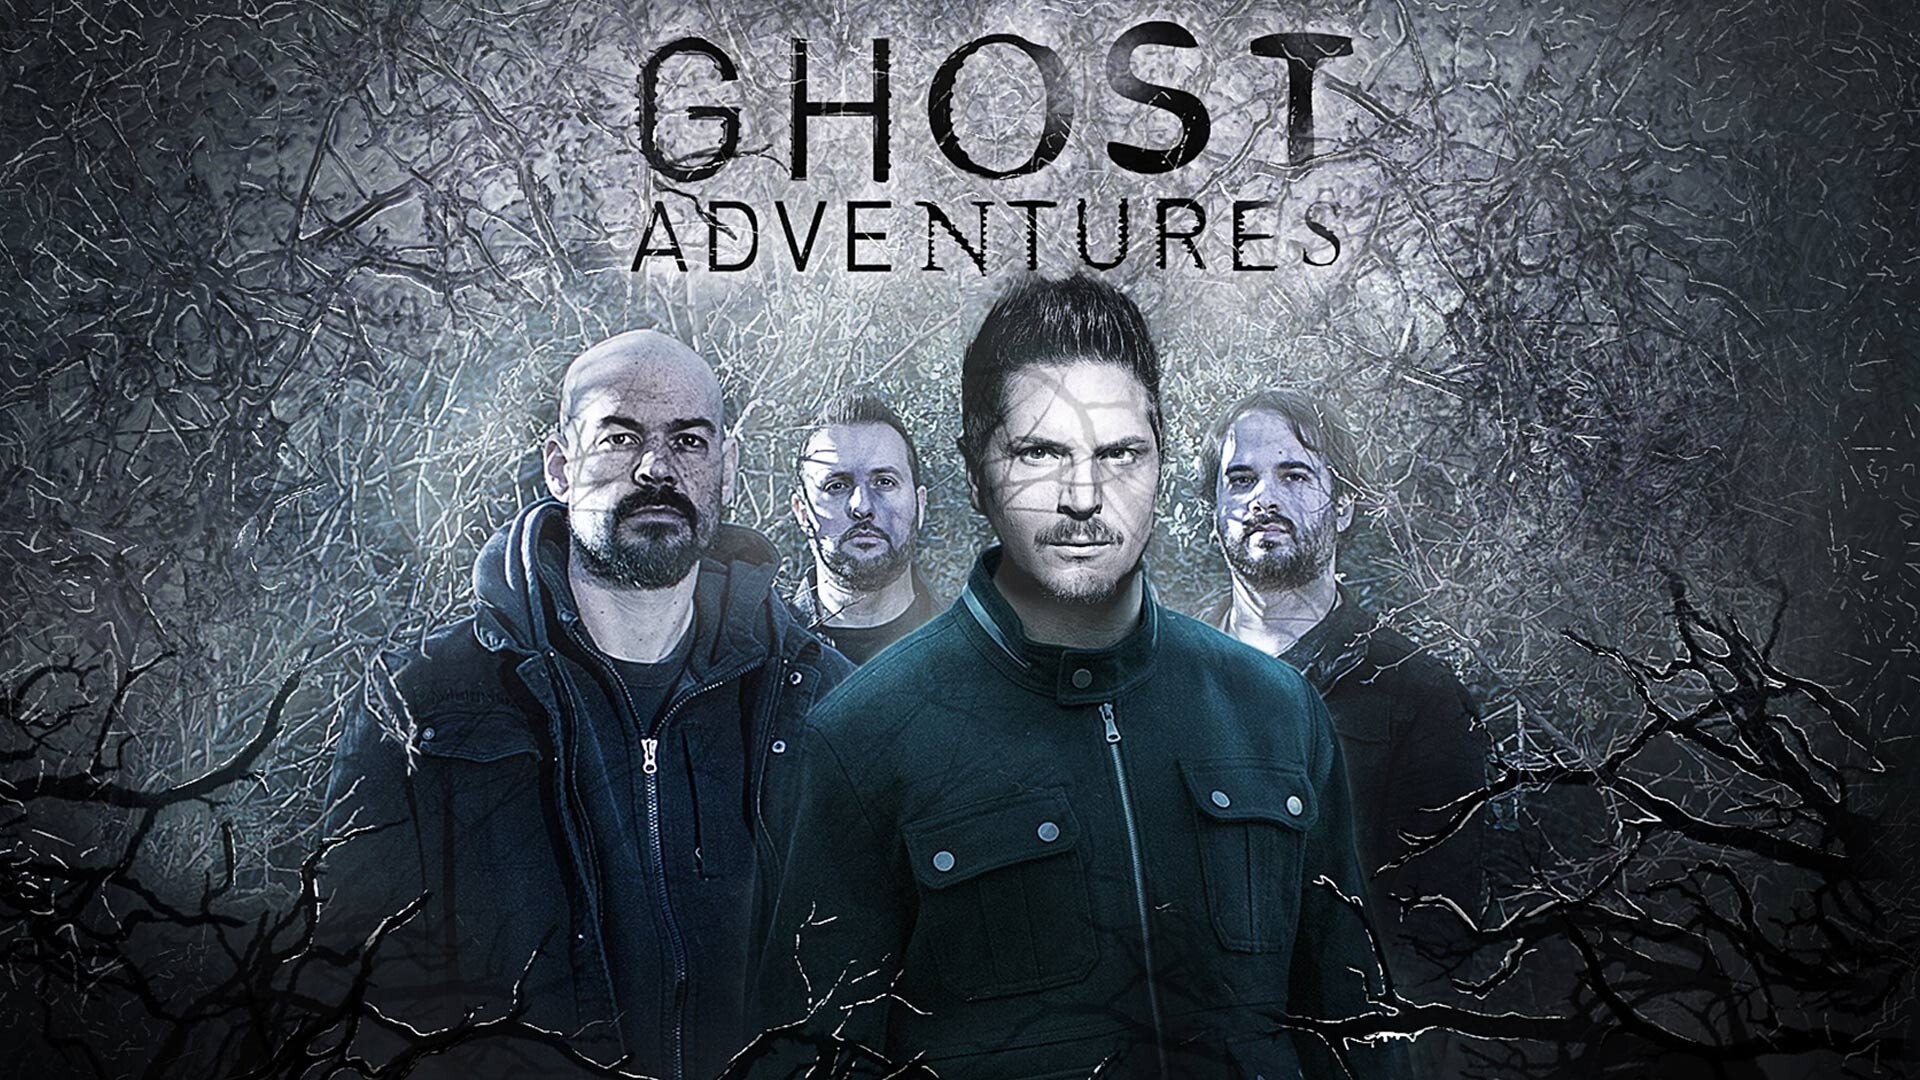 Ghost Adventures (TV Series): Reportedly haunted location in the forest, The team investigates a probable place of murder, Season 7. 1920x1080 Full HD Background.